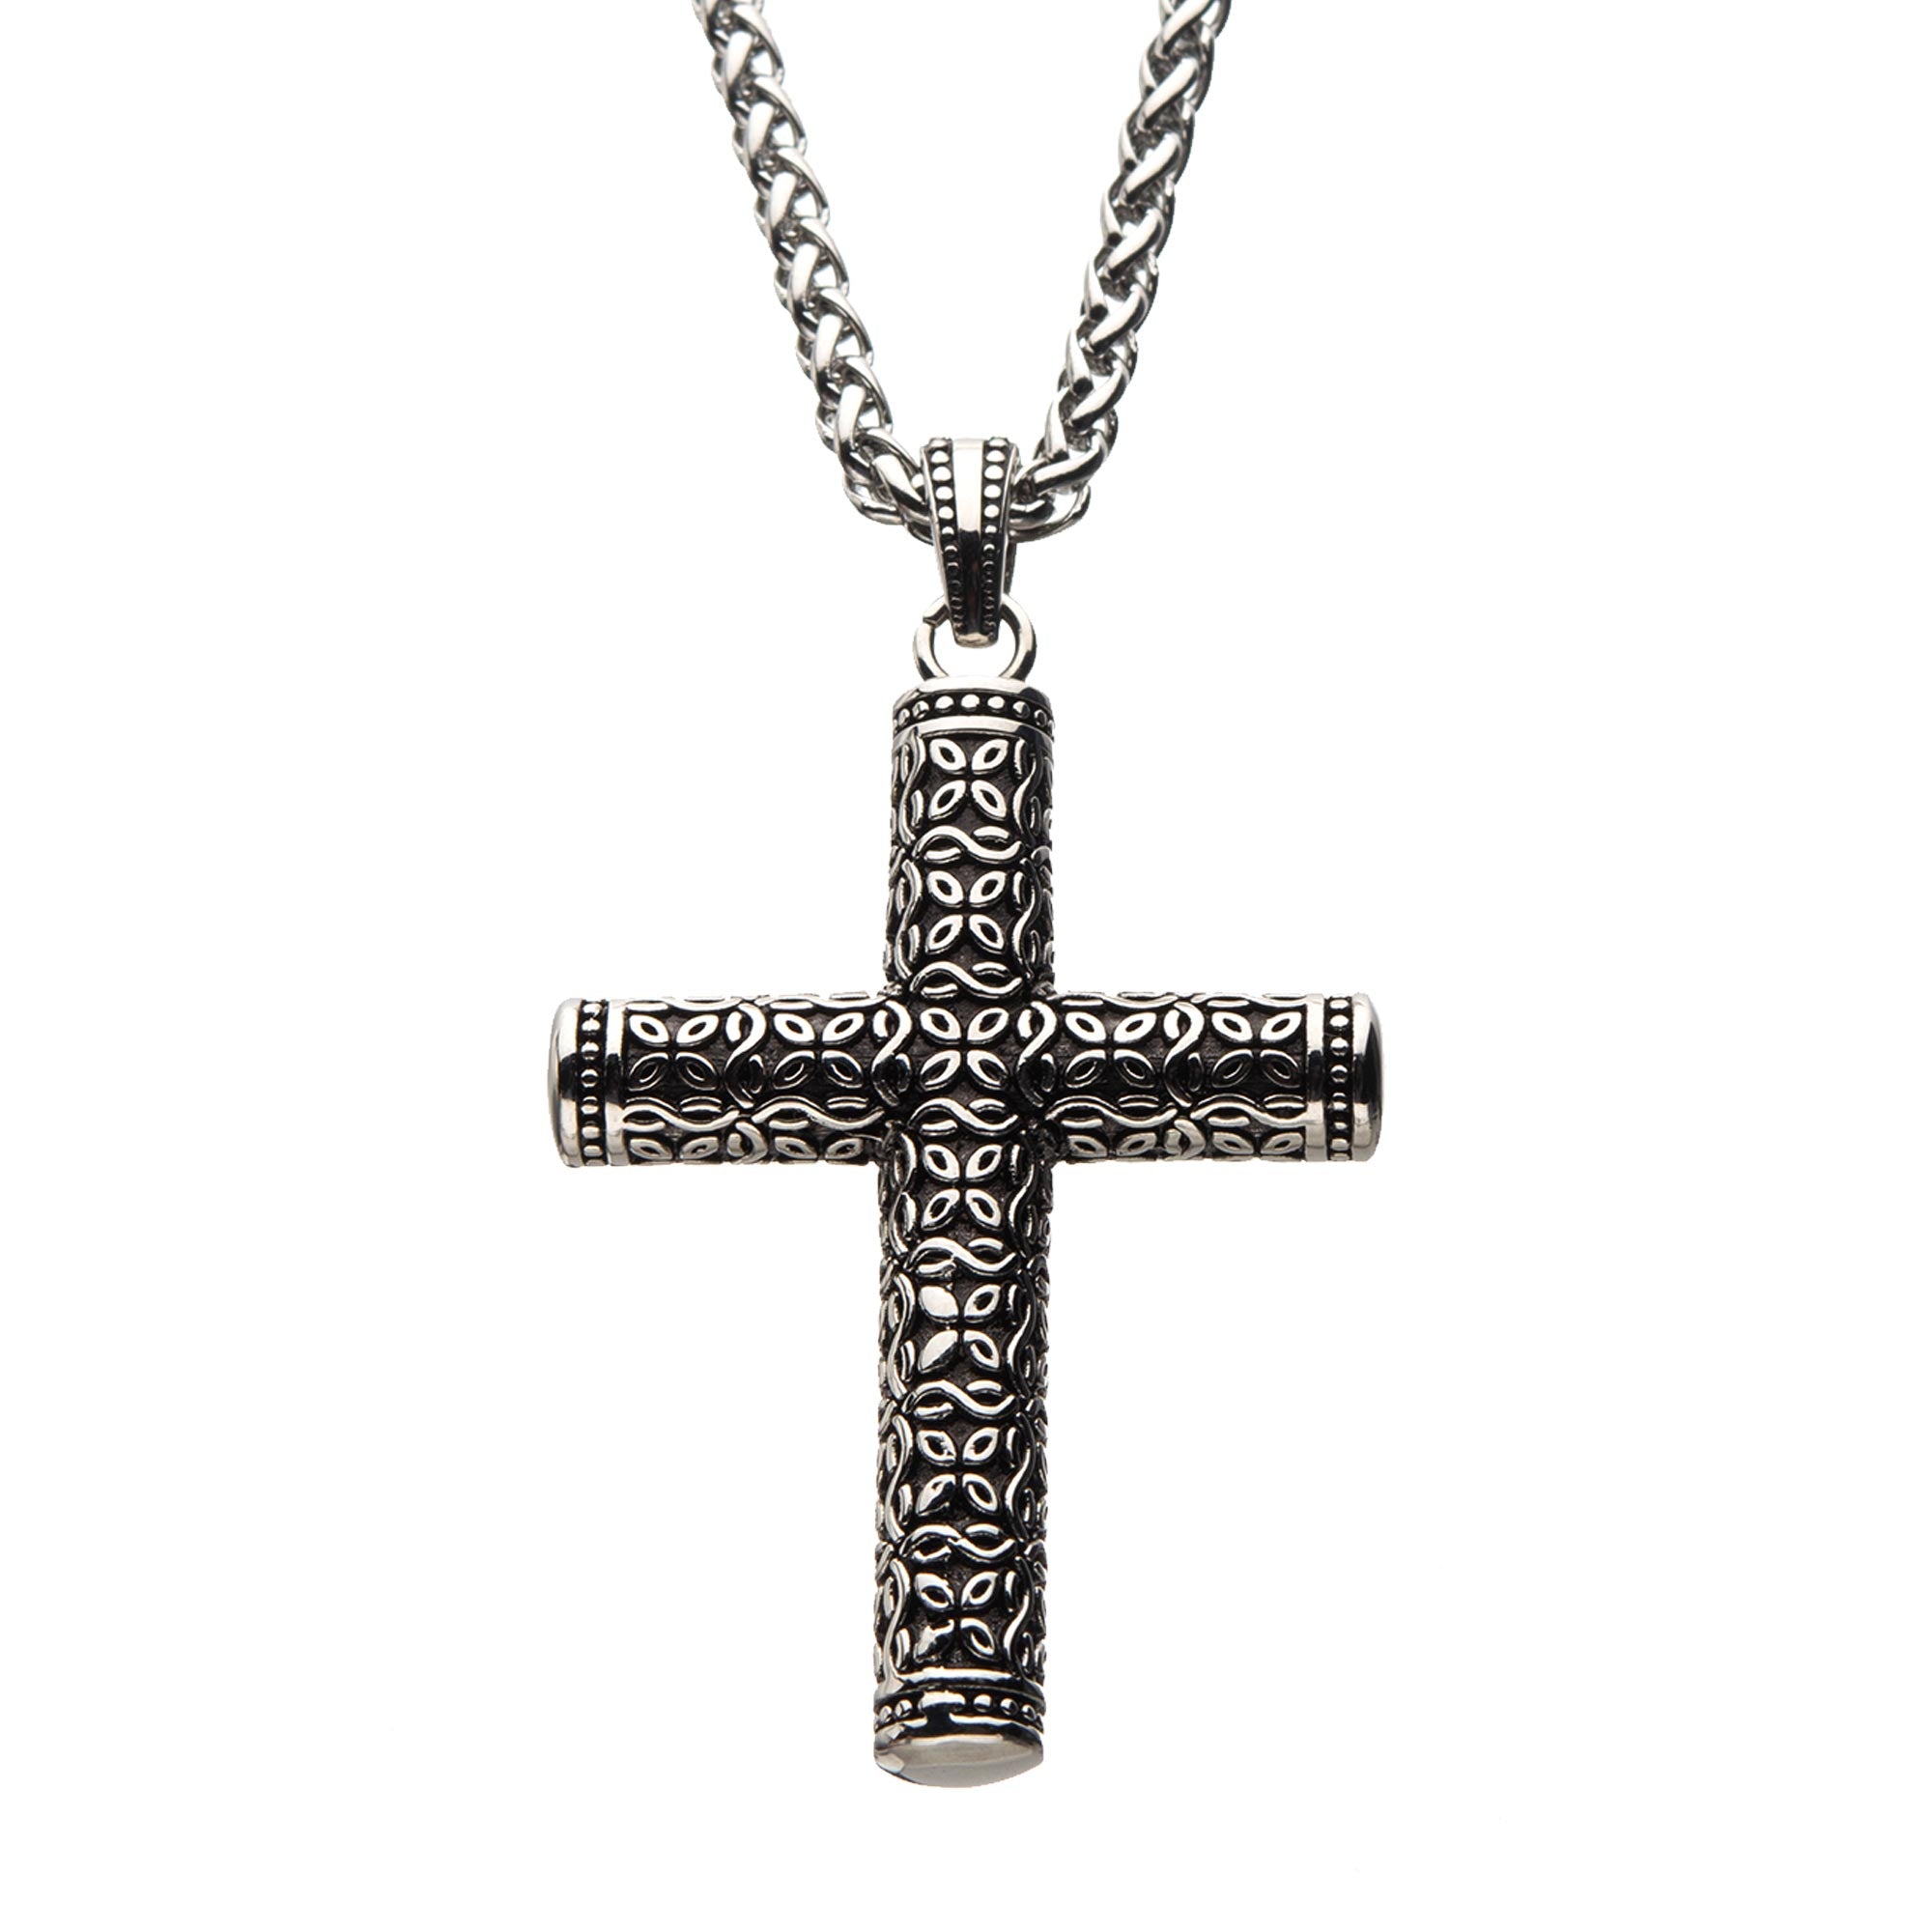 Black Oxidized Steel Rounded Cross Pendant with Steel Wheat Chain